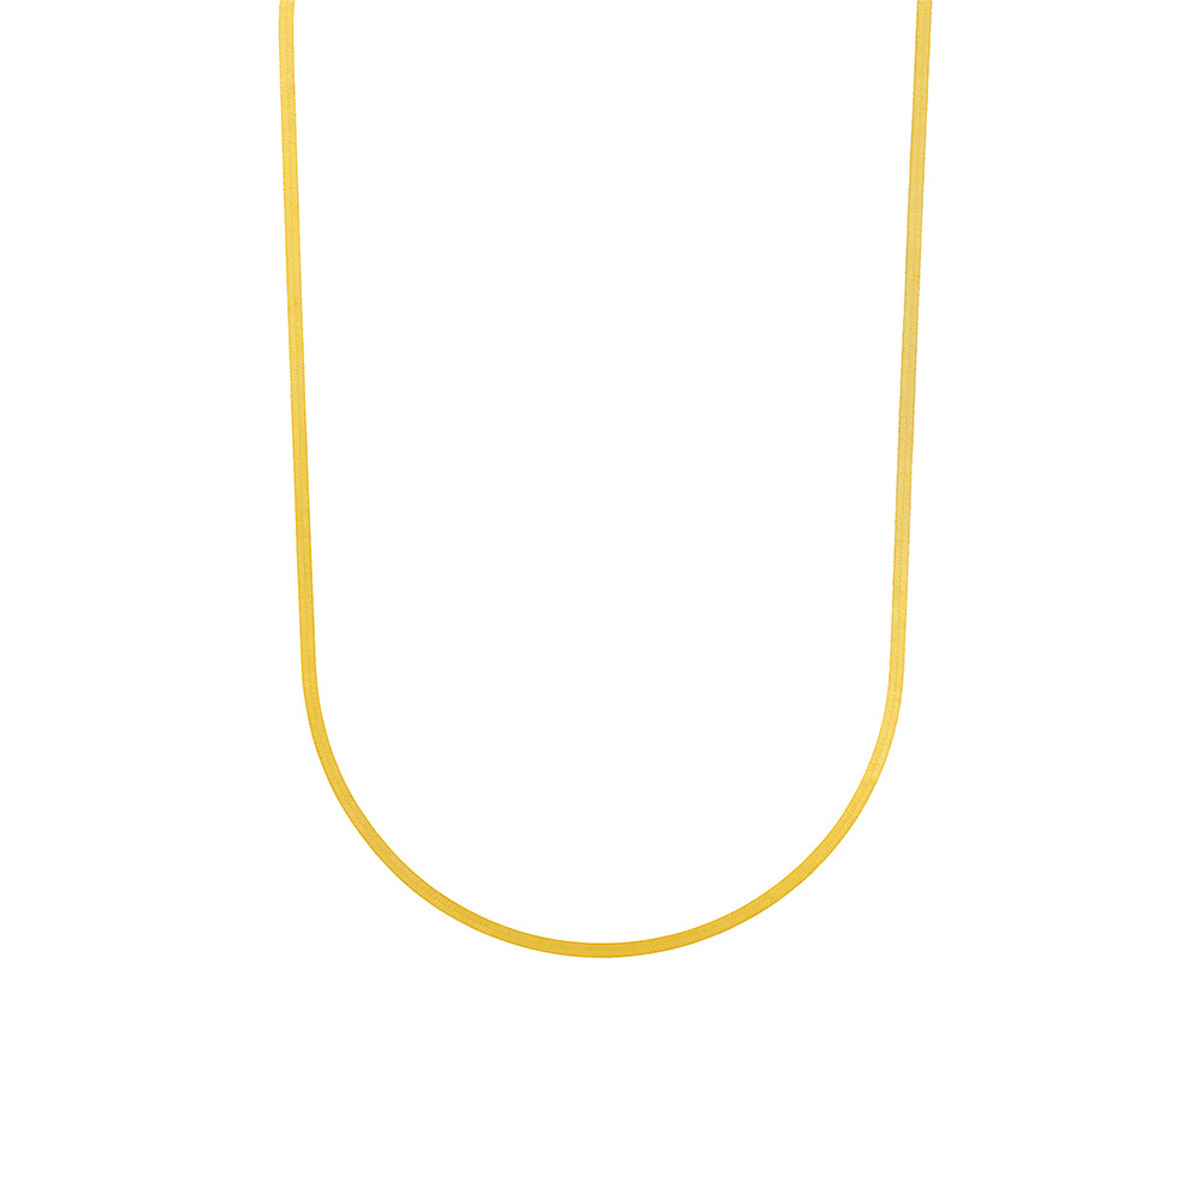 Hyde Park Collection Herringbone Chain Necklace-26419 Product Image